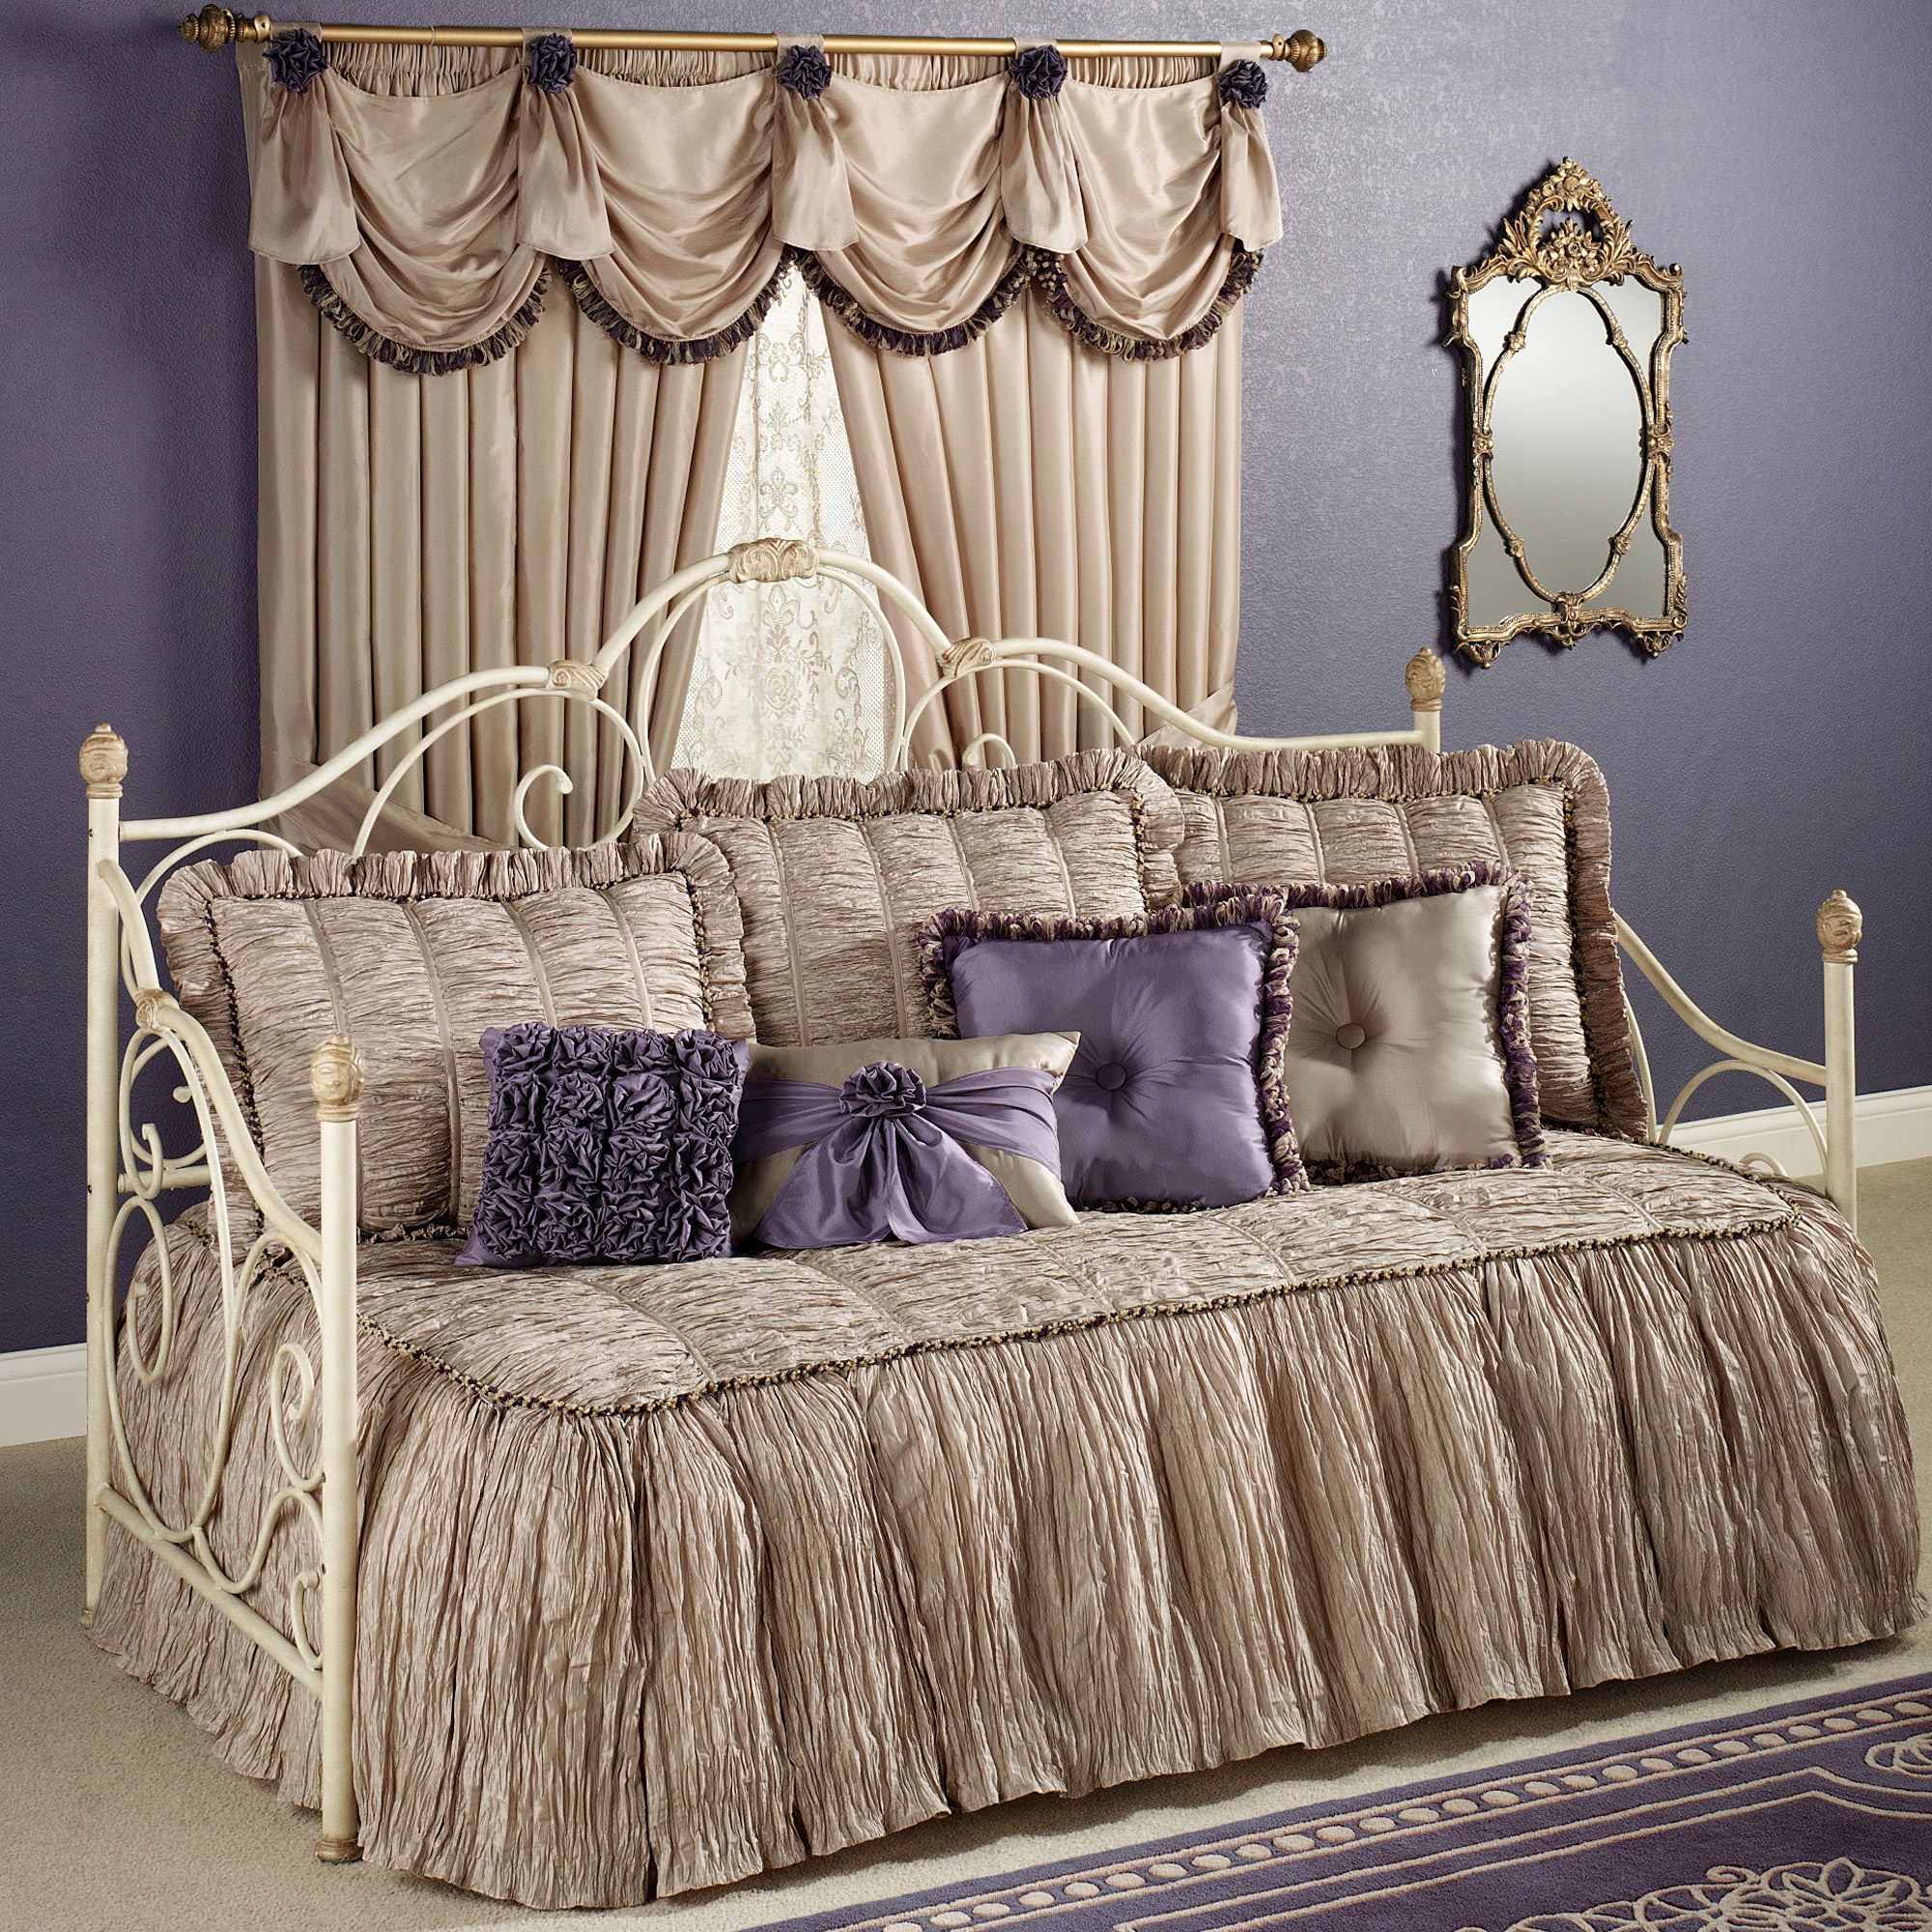 Day bed sets